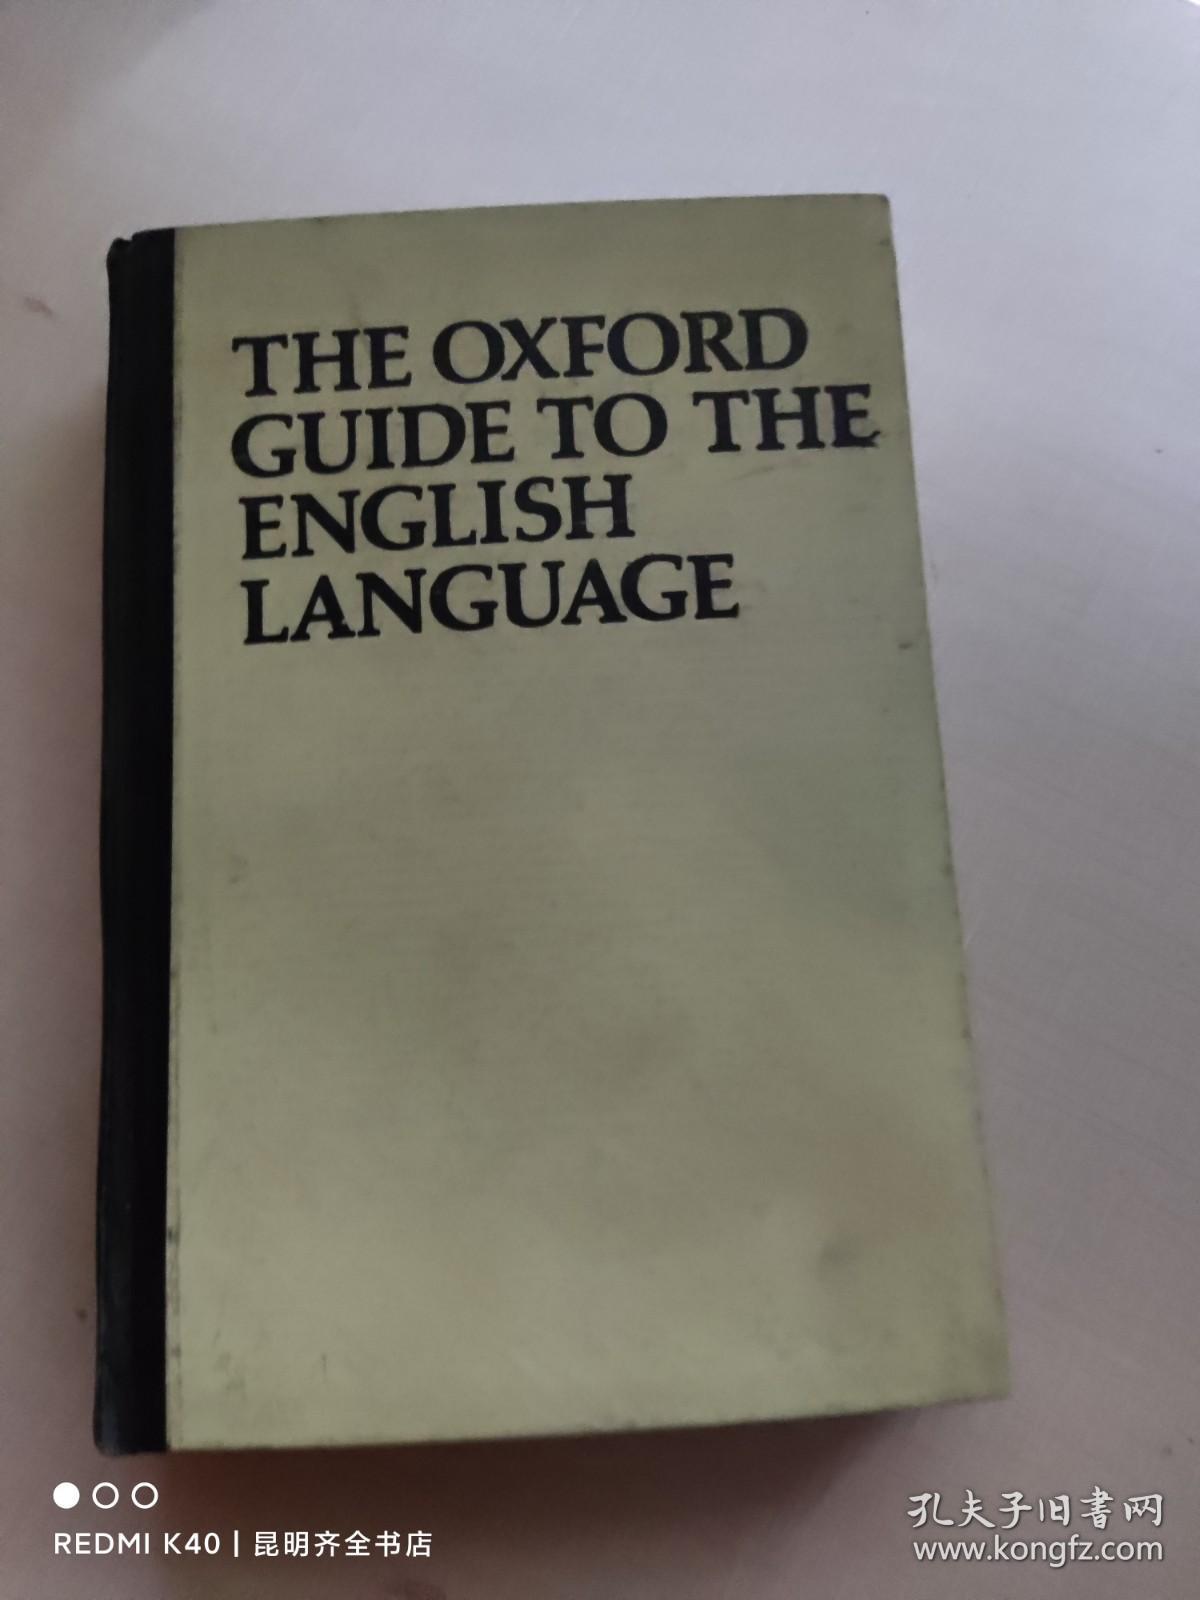 THE OXFORD GUIDE TO THE ENGLISH LANGUAGE牛津英语指南（英文原版）